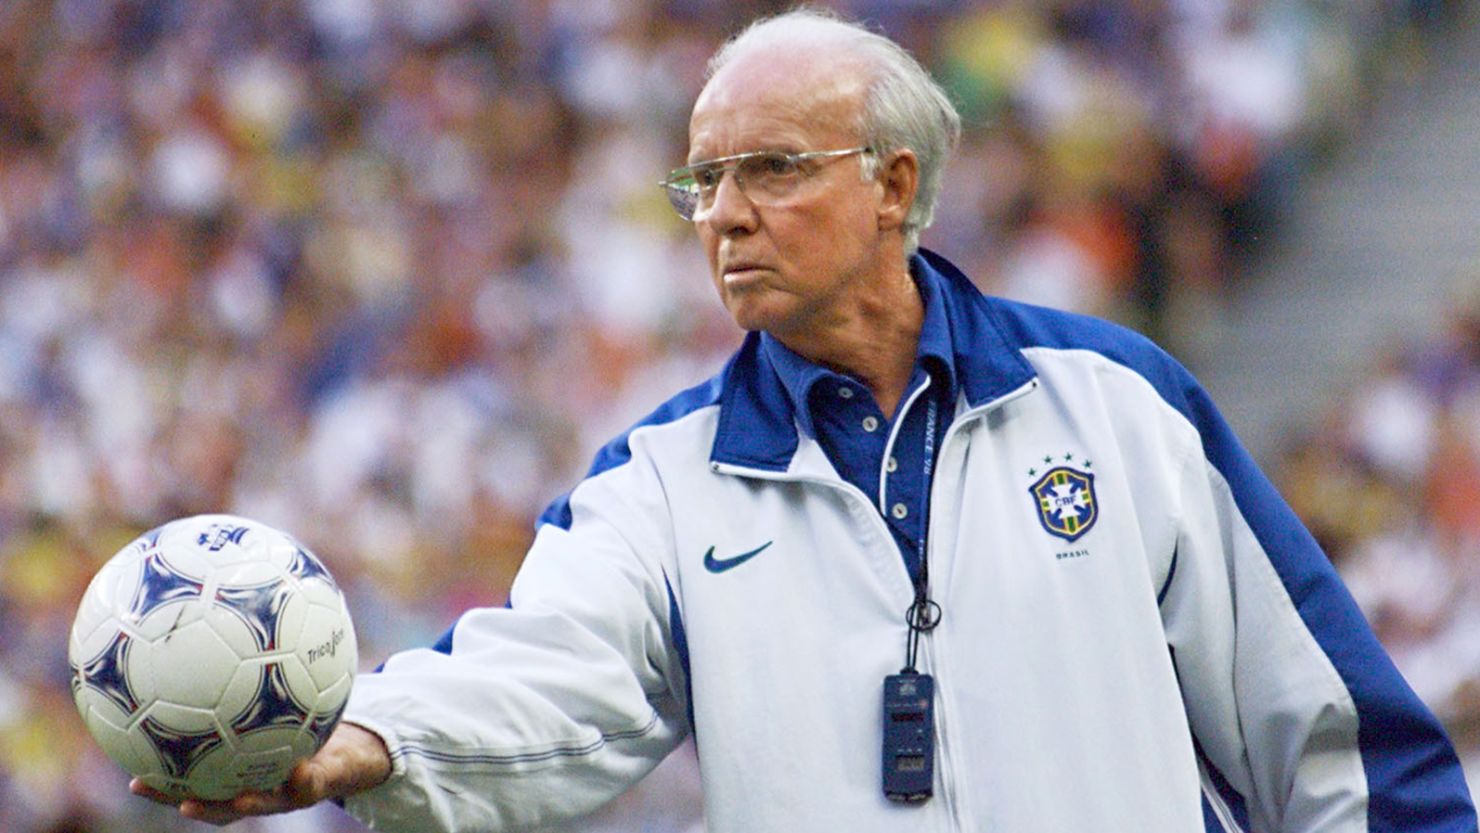 SAINT-DENIS, :  Brazilian coach Mario Zagallo holds the ball 12 July during the 1998 World Cup final between Brazil and France at the Stade de France in Saint-Denis. Host France beat defending champion Brazil 3-0 and won the 1998 FIFA trophy.